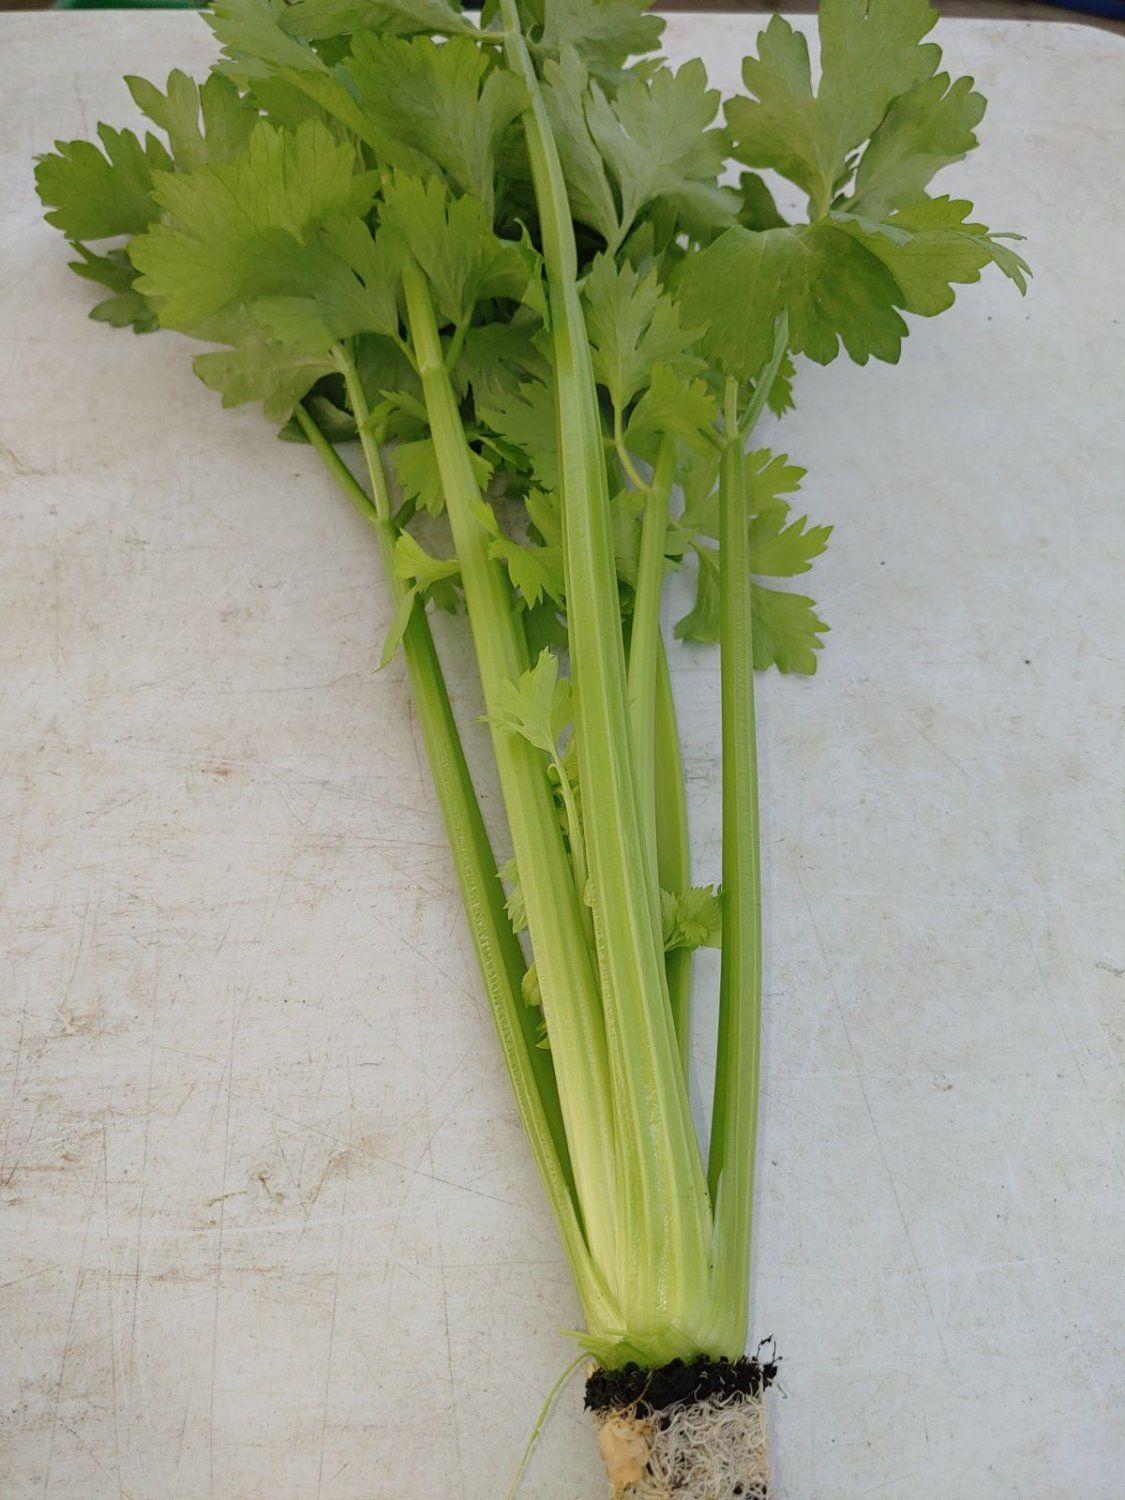 Next Happening: Fresh Harvest Alert: Celery from Southern Alberta and More!